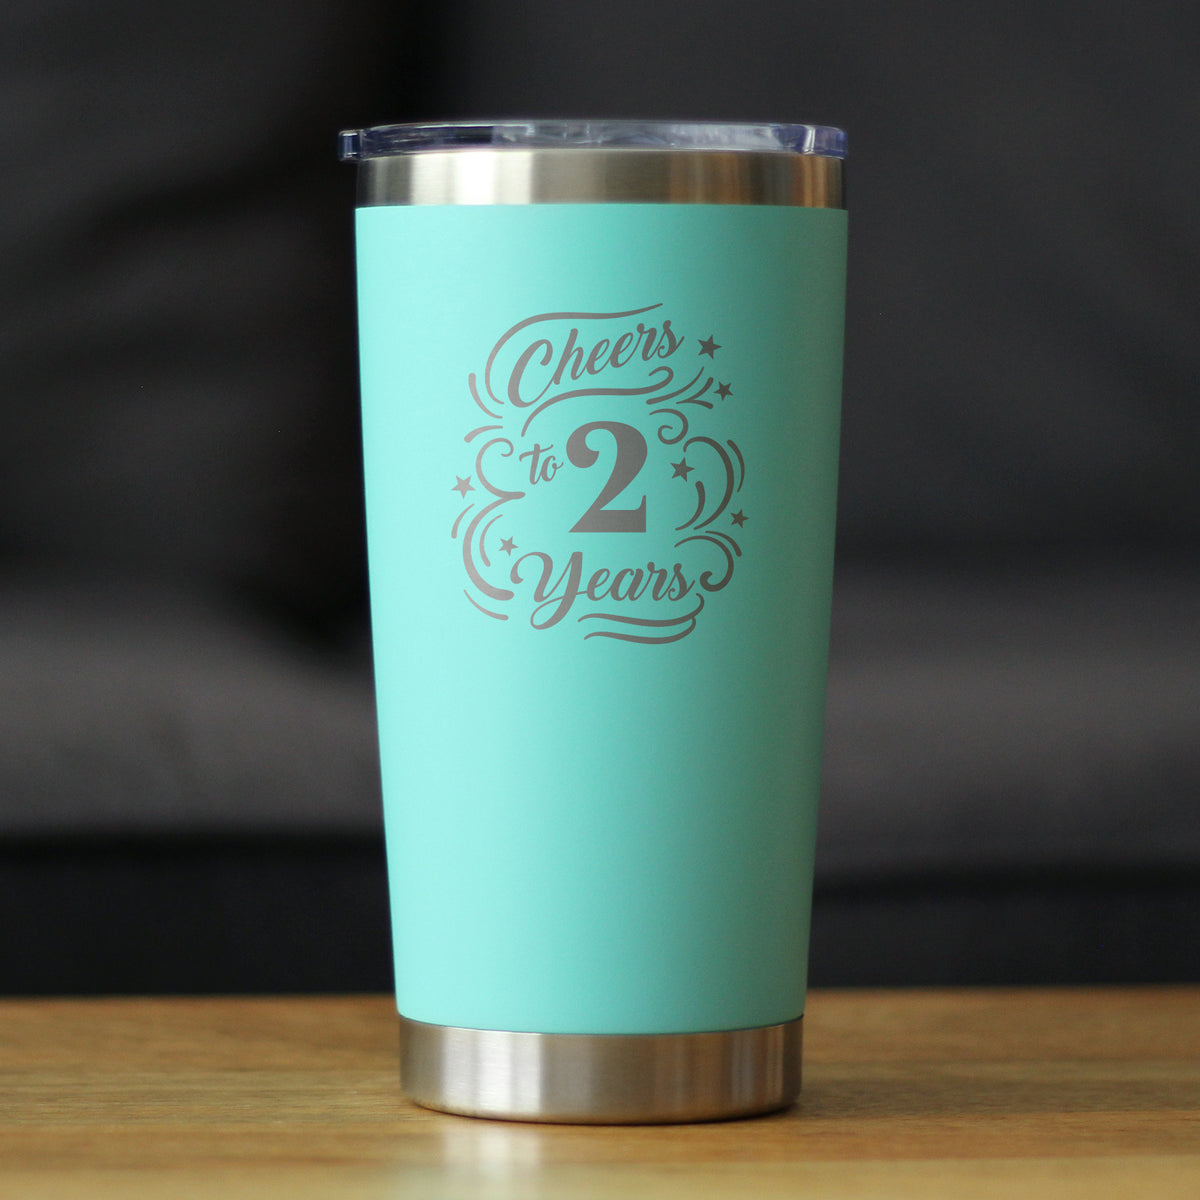 Cheers to 2 Years - Insulated Coffee Tumbler Cup with Sliding Lid - Stainless Steel Insulated Mug - 2nd Anniversary Gifts and Party Decor